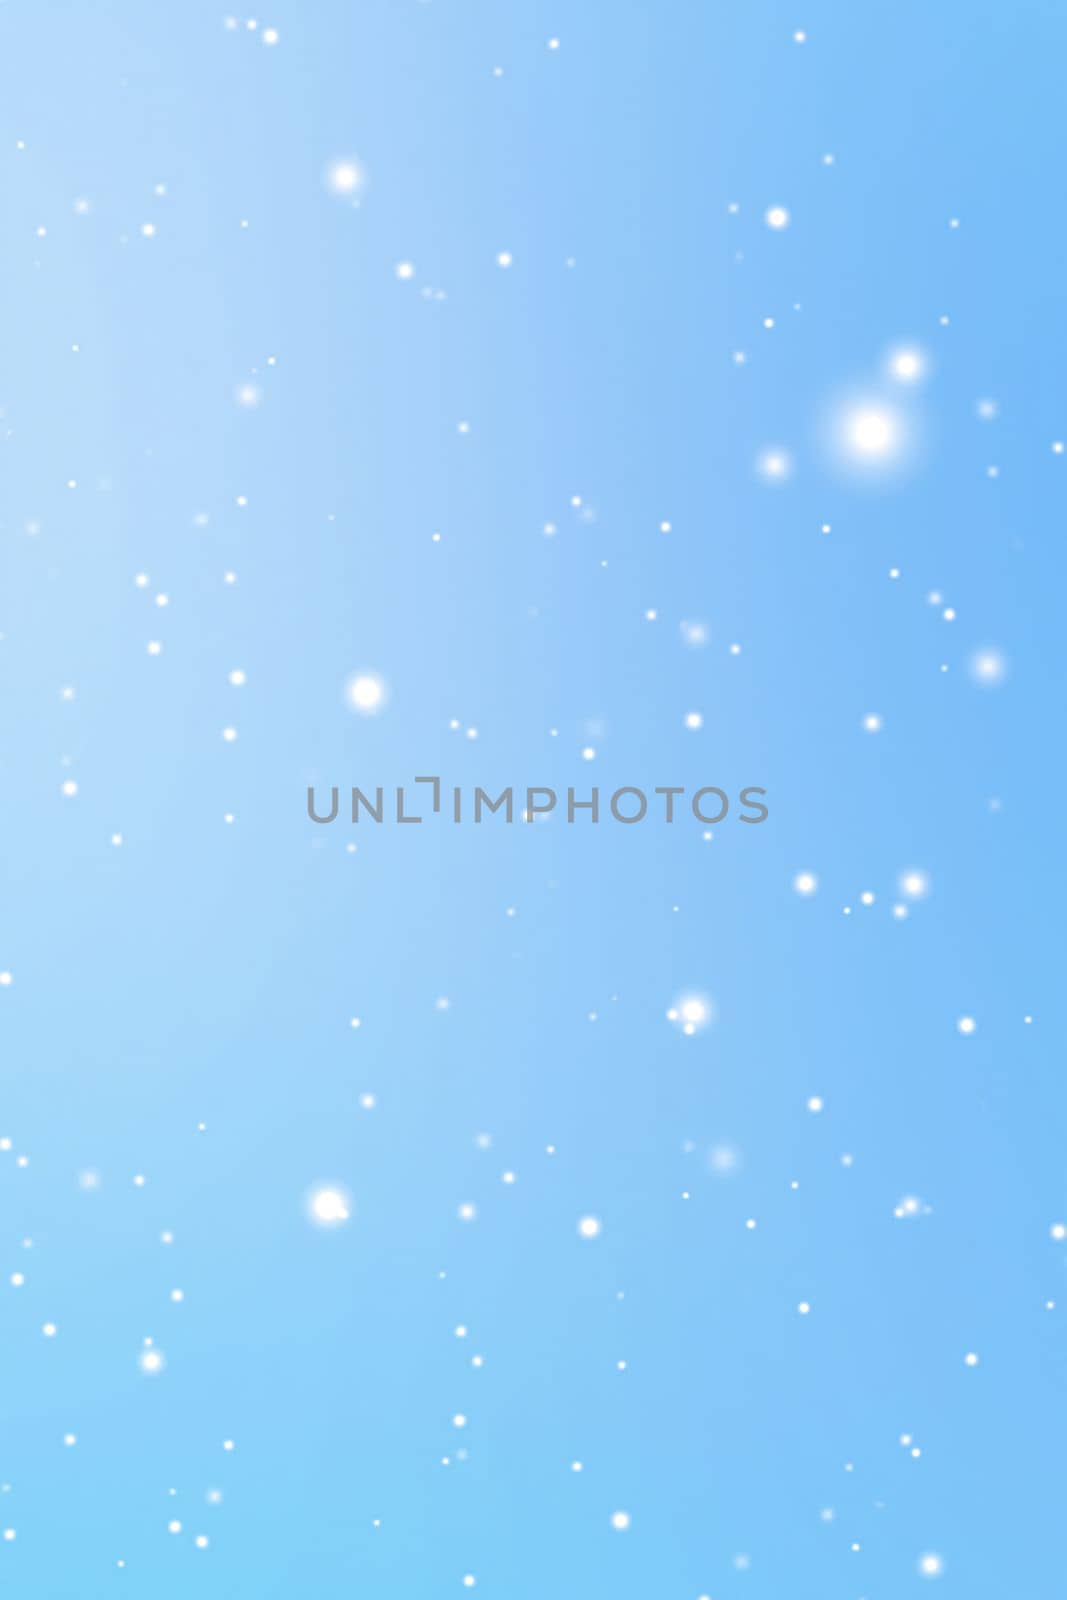 Winter holidays and wintertime background, white snow falling on blue backdrop, snowflakes bokeh and snowfall particles as abstract snowing scene for Christmas and snowy holiday design by Anneleven